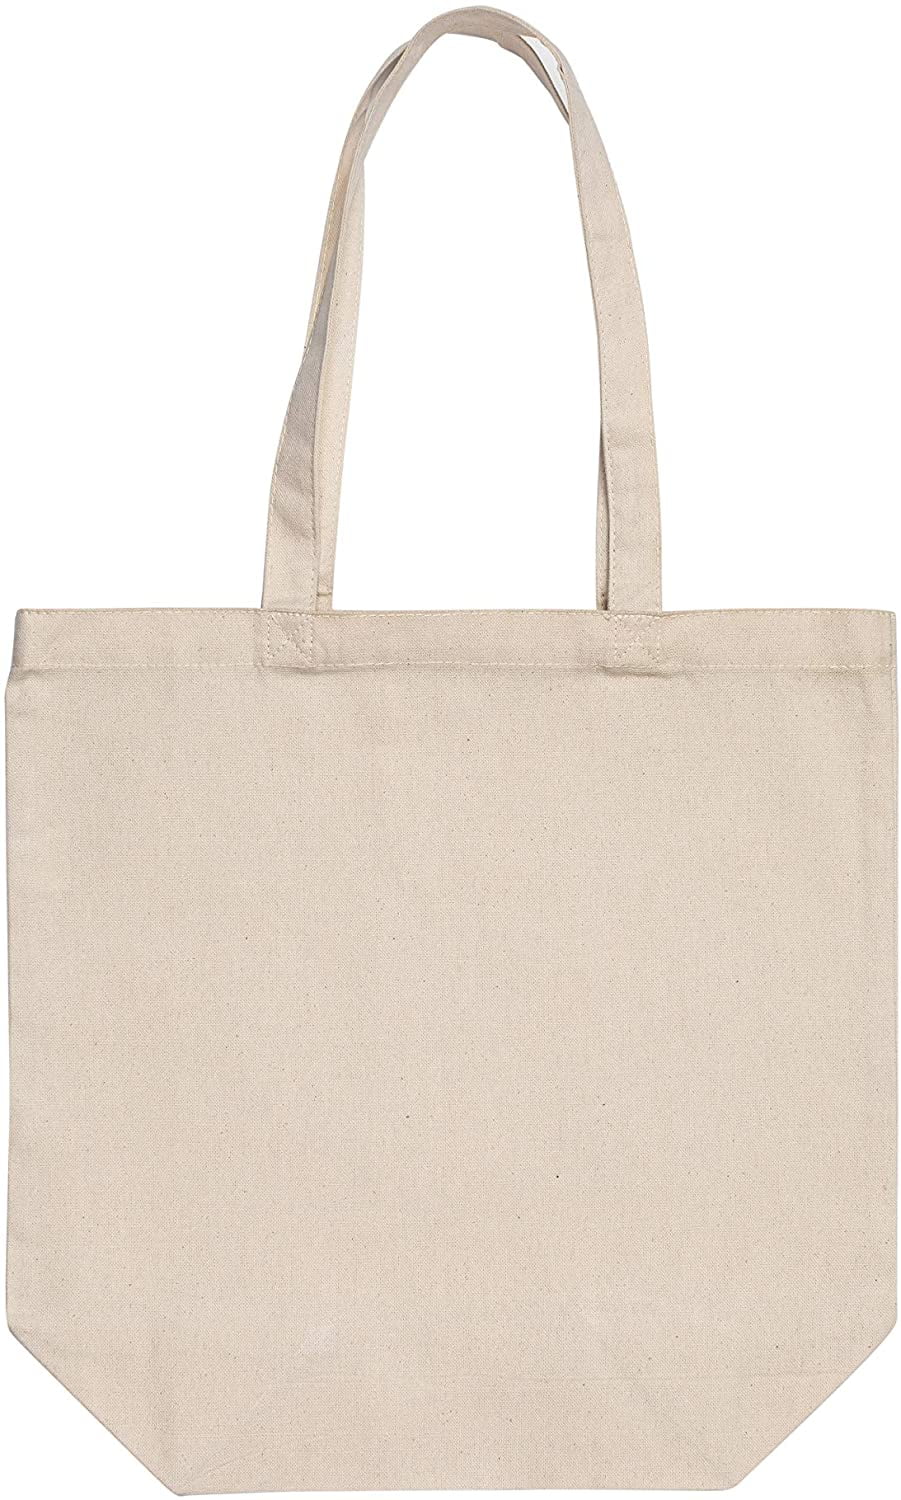 Decorate Your Own Bag Plain Tote Bags Cotton Tote Blanks Wholesale 